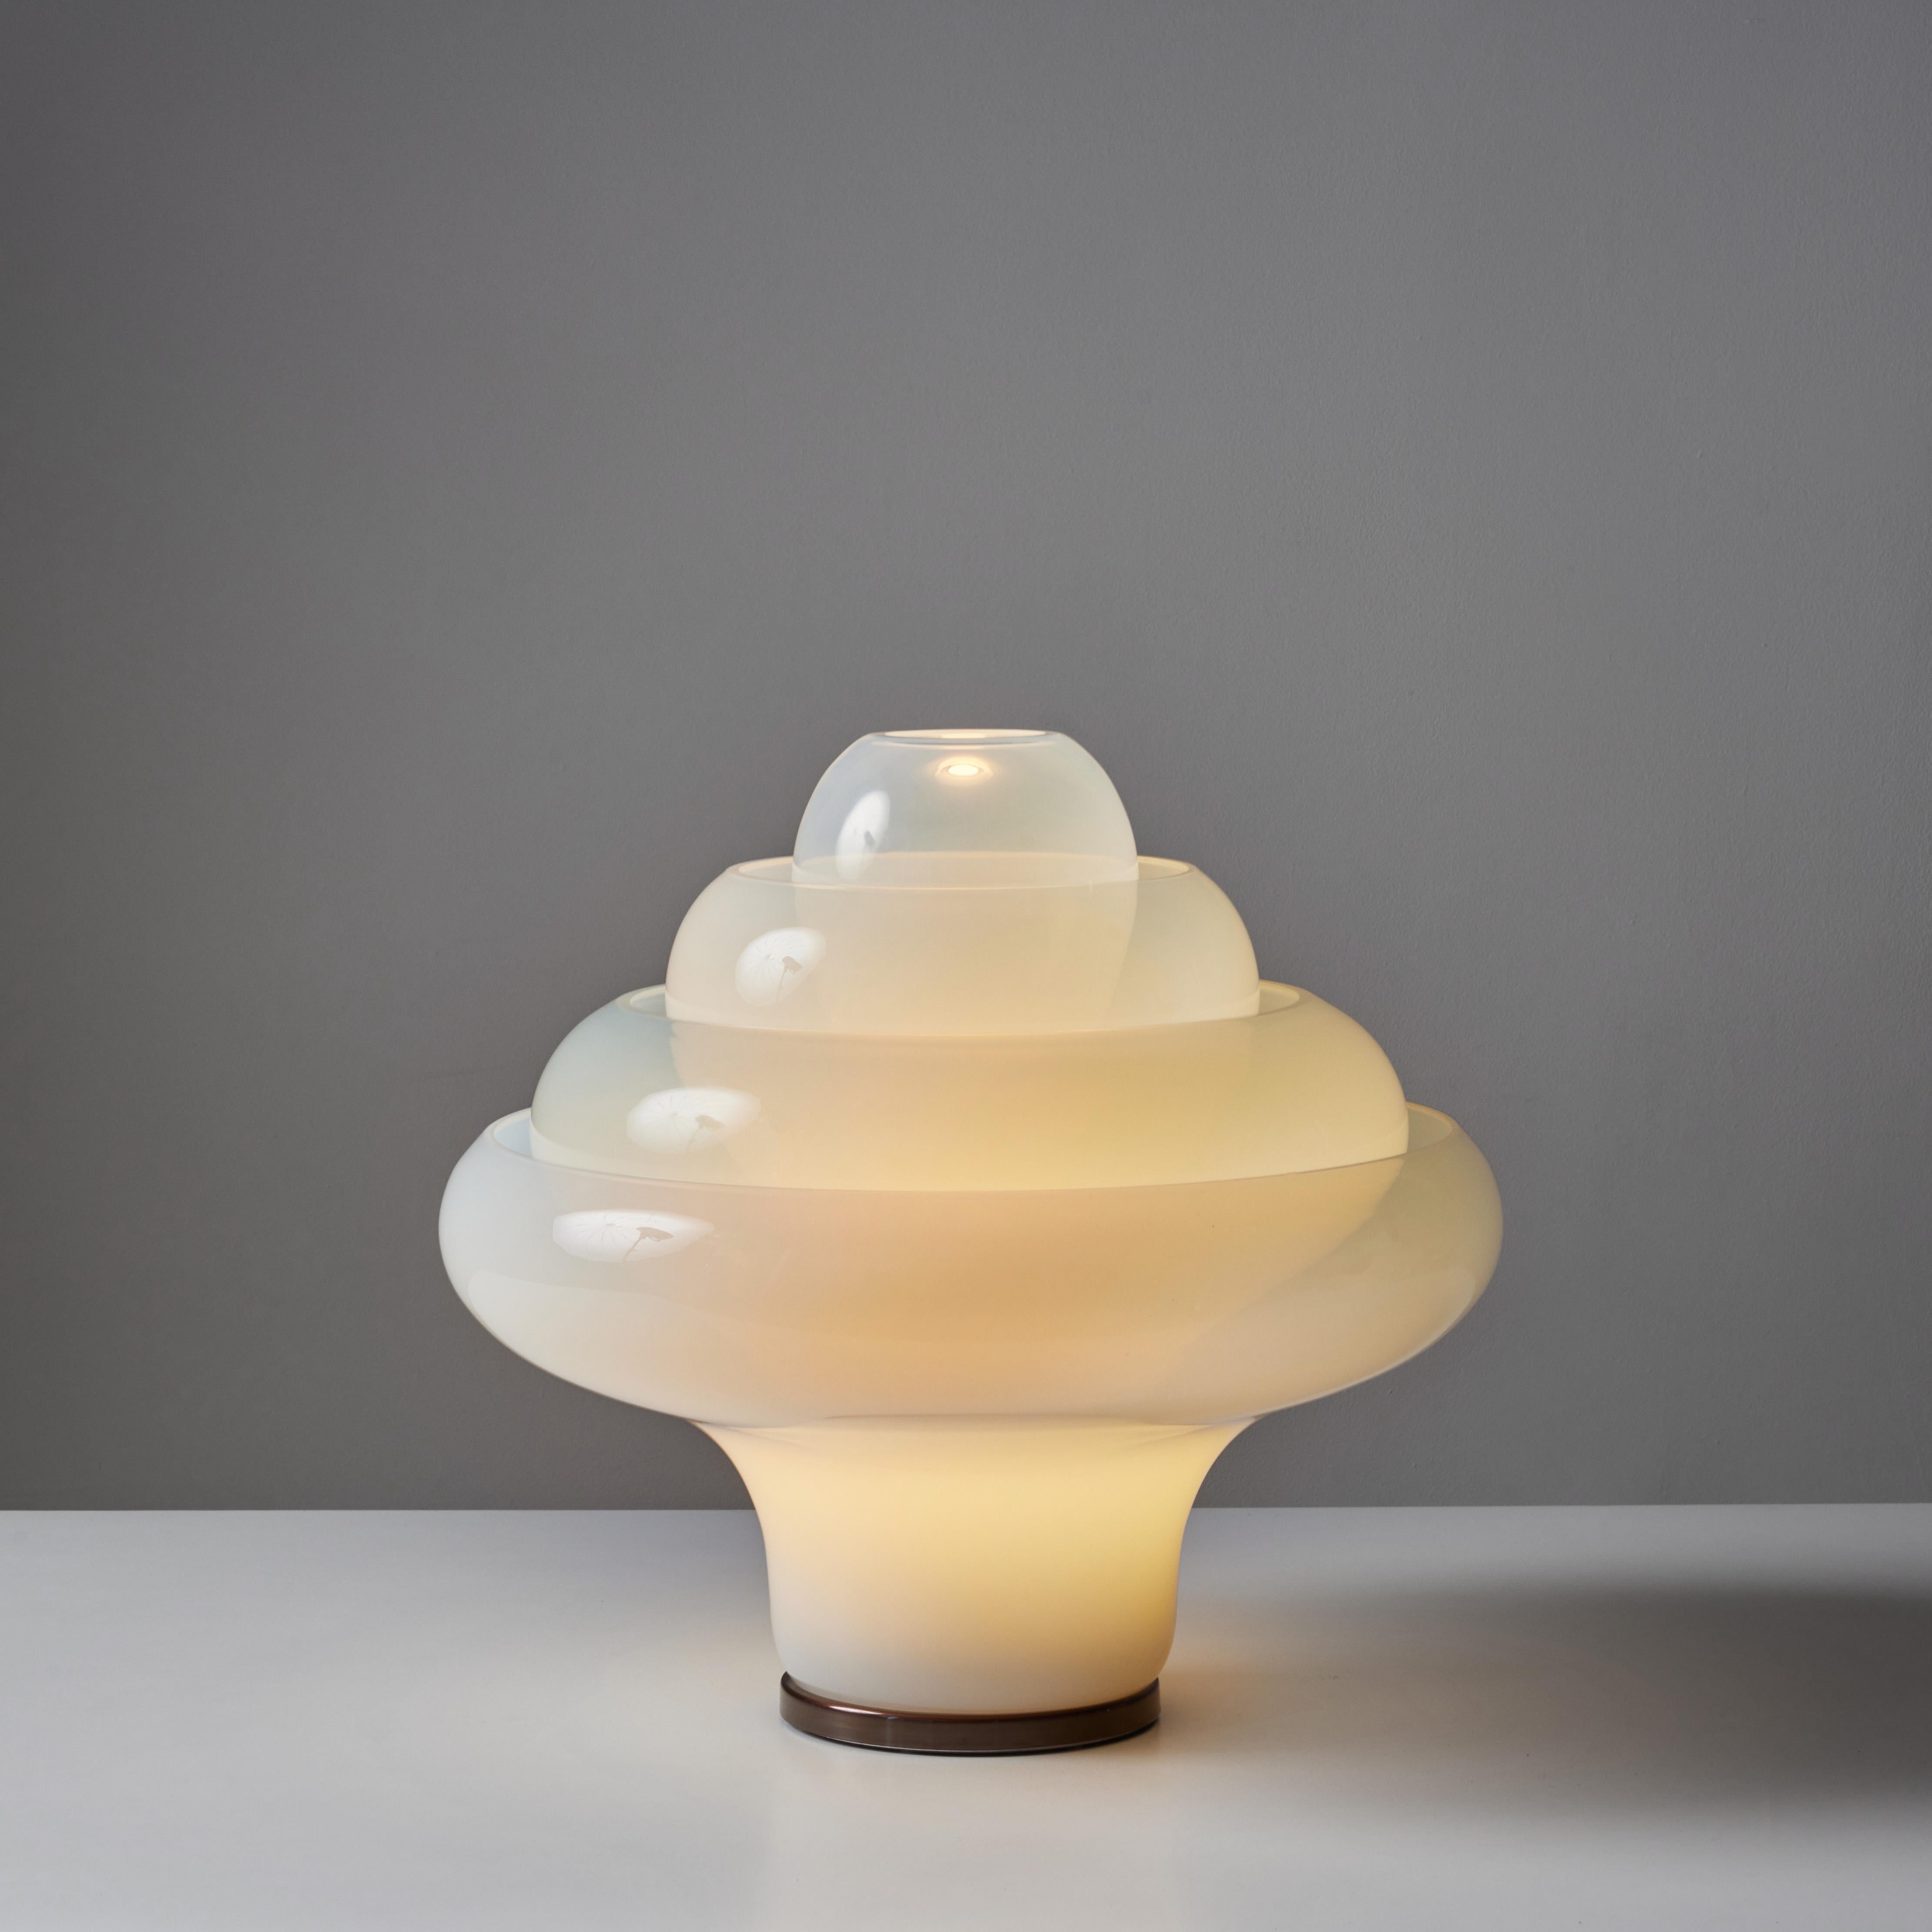 Table lamp by Carlo Nason for Mazzega c.1970s, Italy, is sure to light up any room in your home. The lamp features four glass pieces inset to one another forming a lotus shape. The Model LT305 blown Murano glass lamp is set on a round bronzed